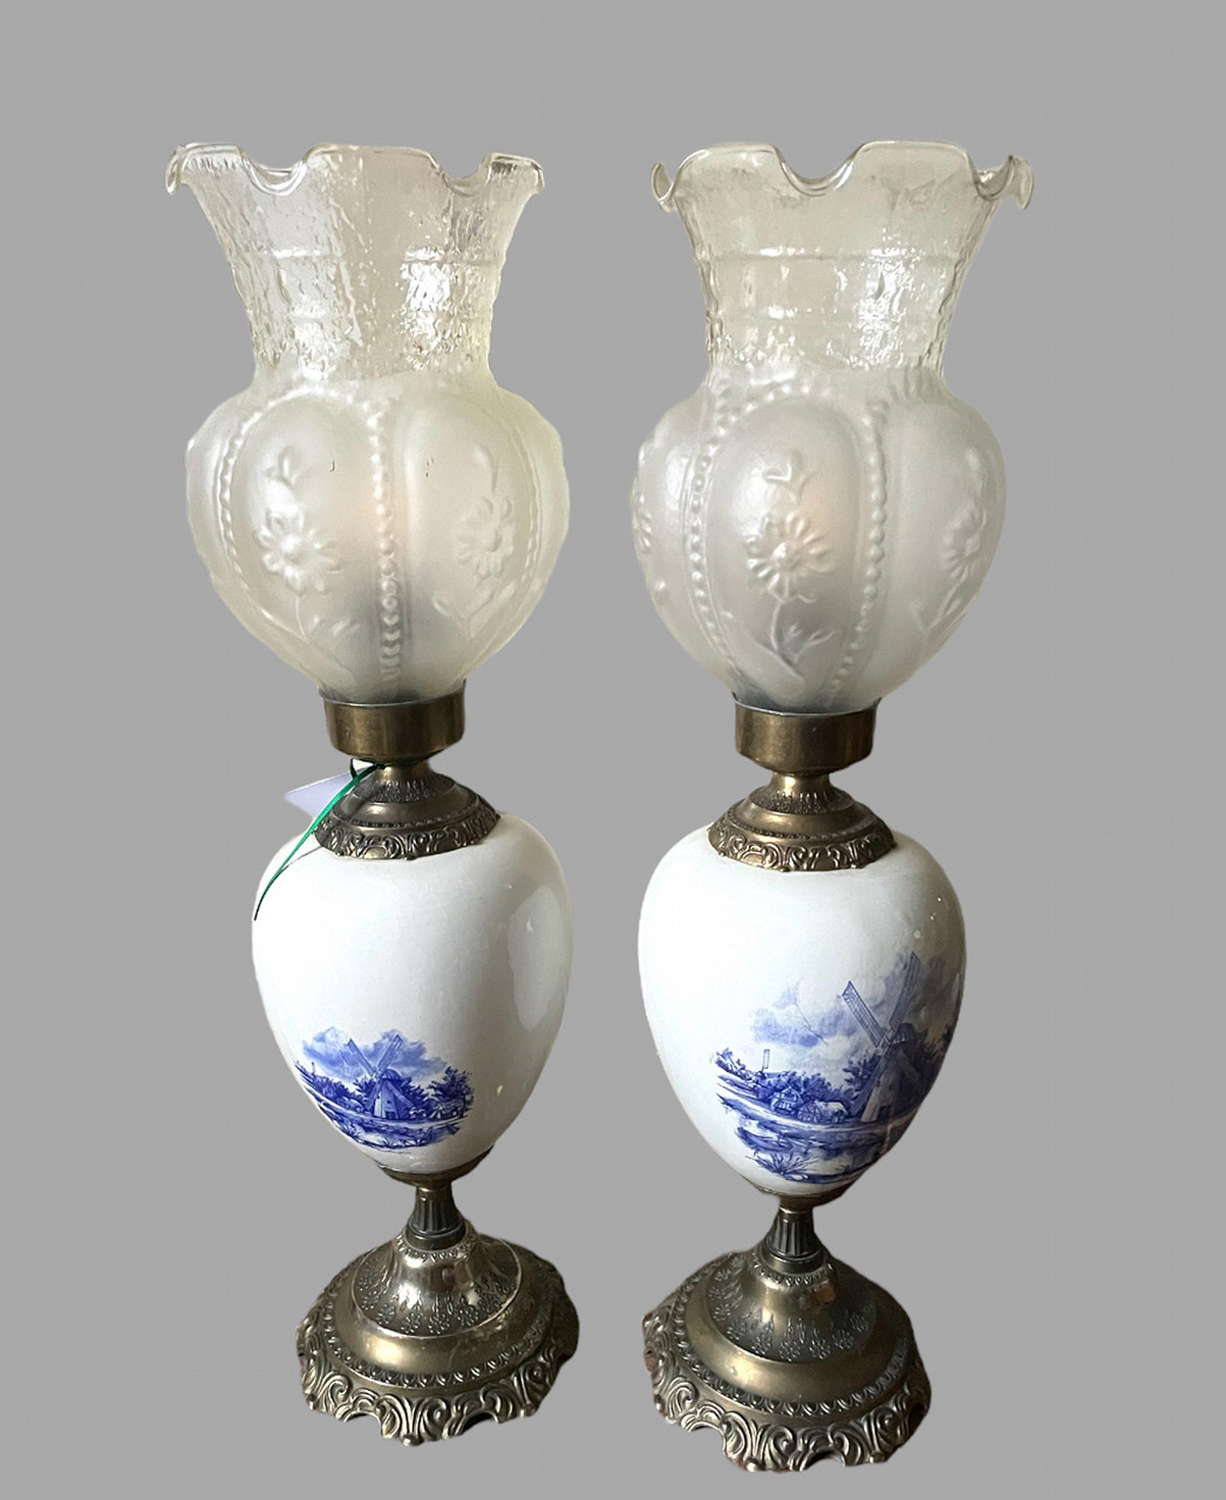 A Pair of Delft Table Lamps